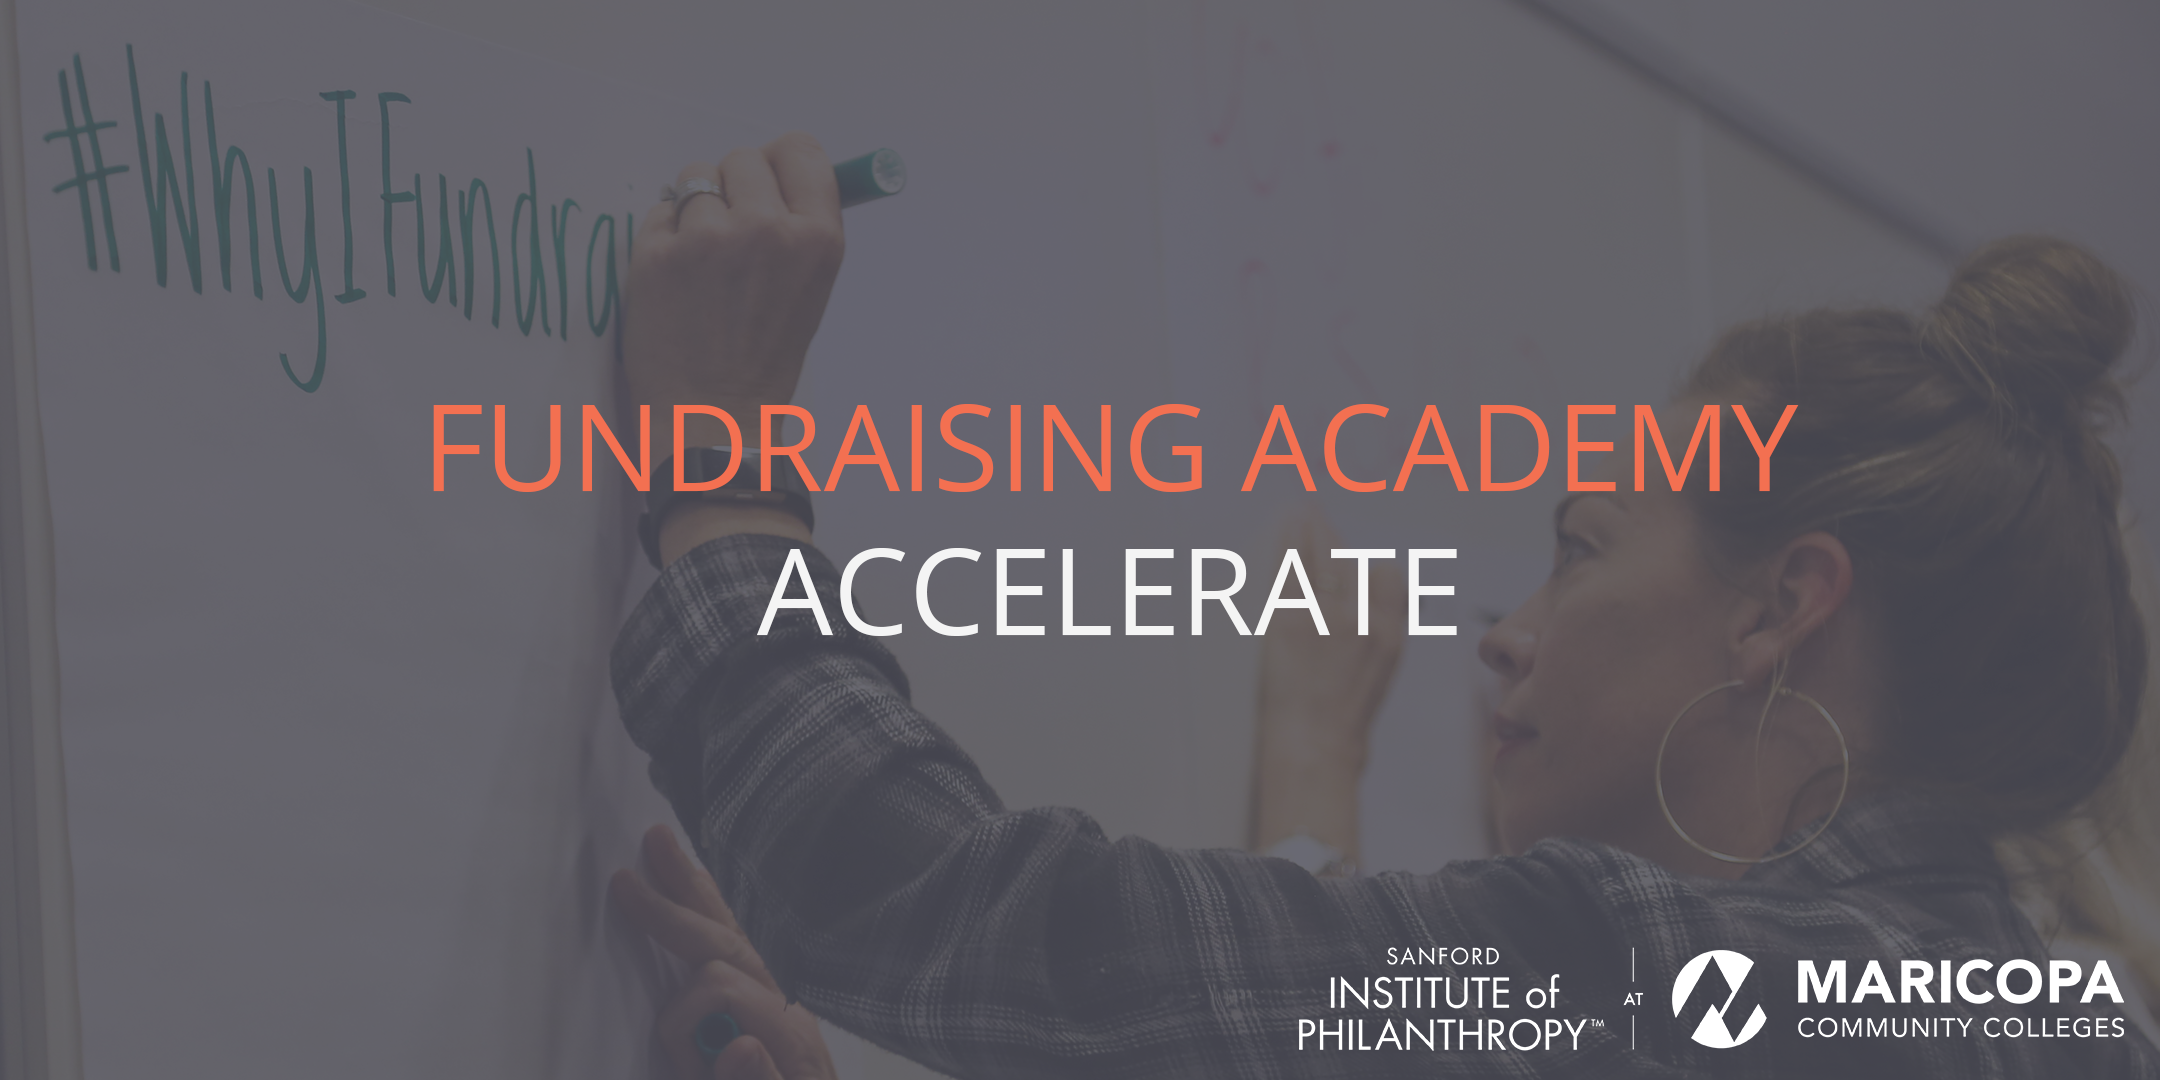 Fundraising Academy Accelerate